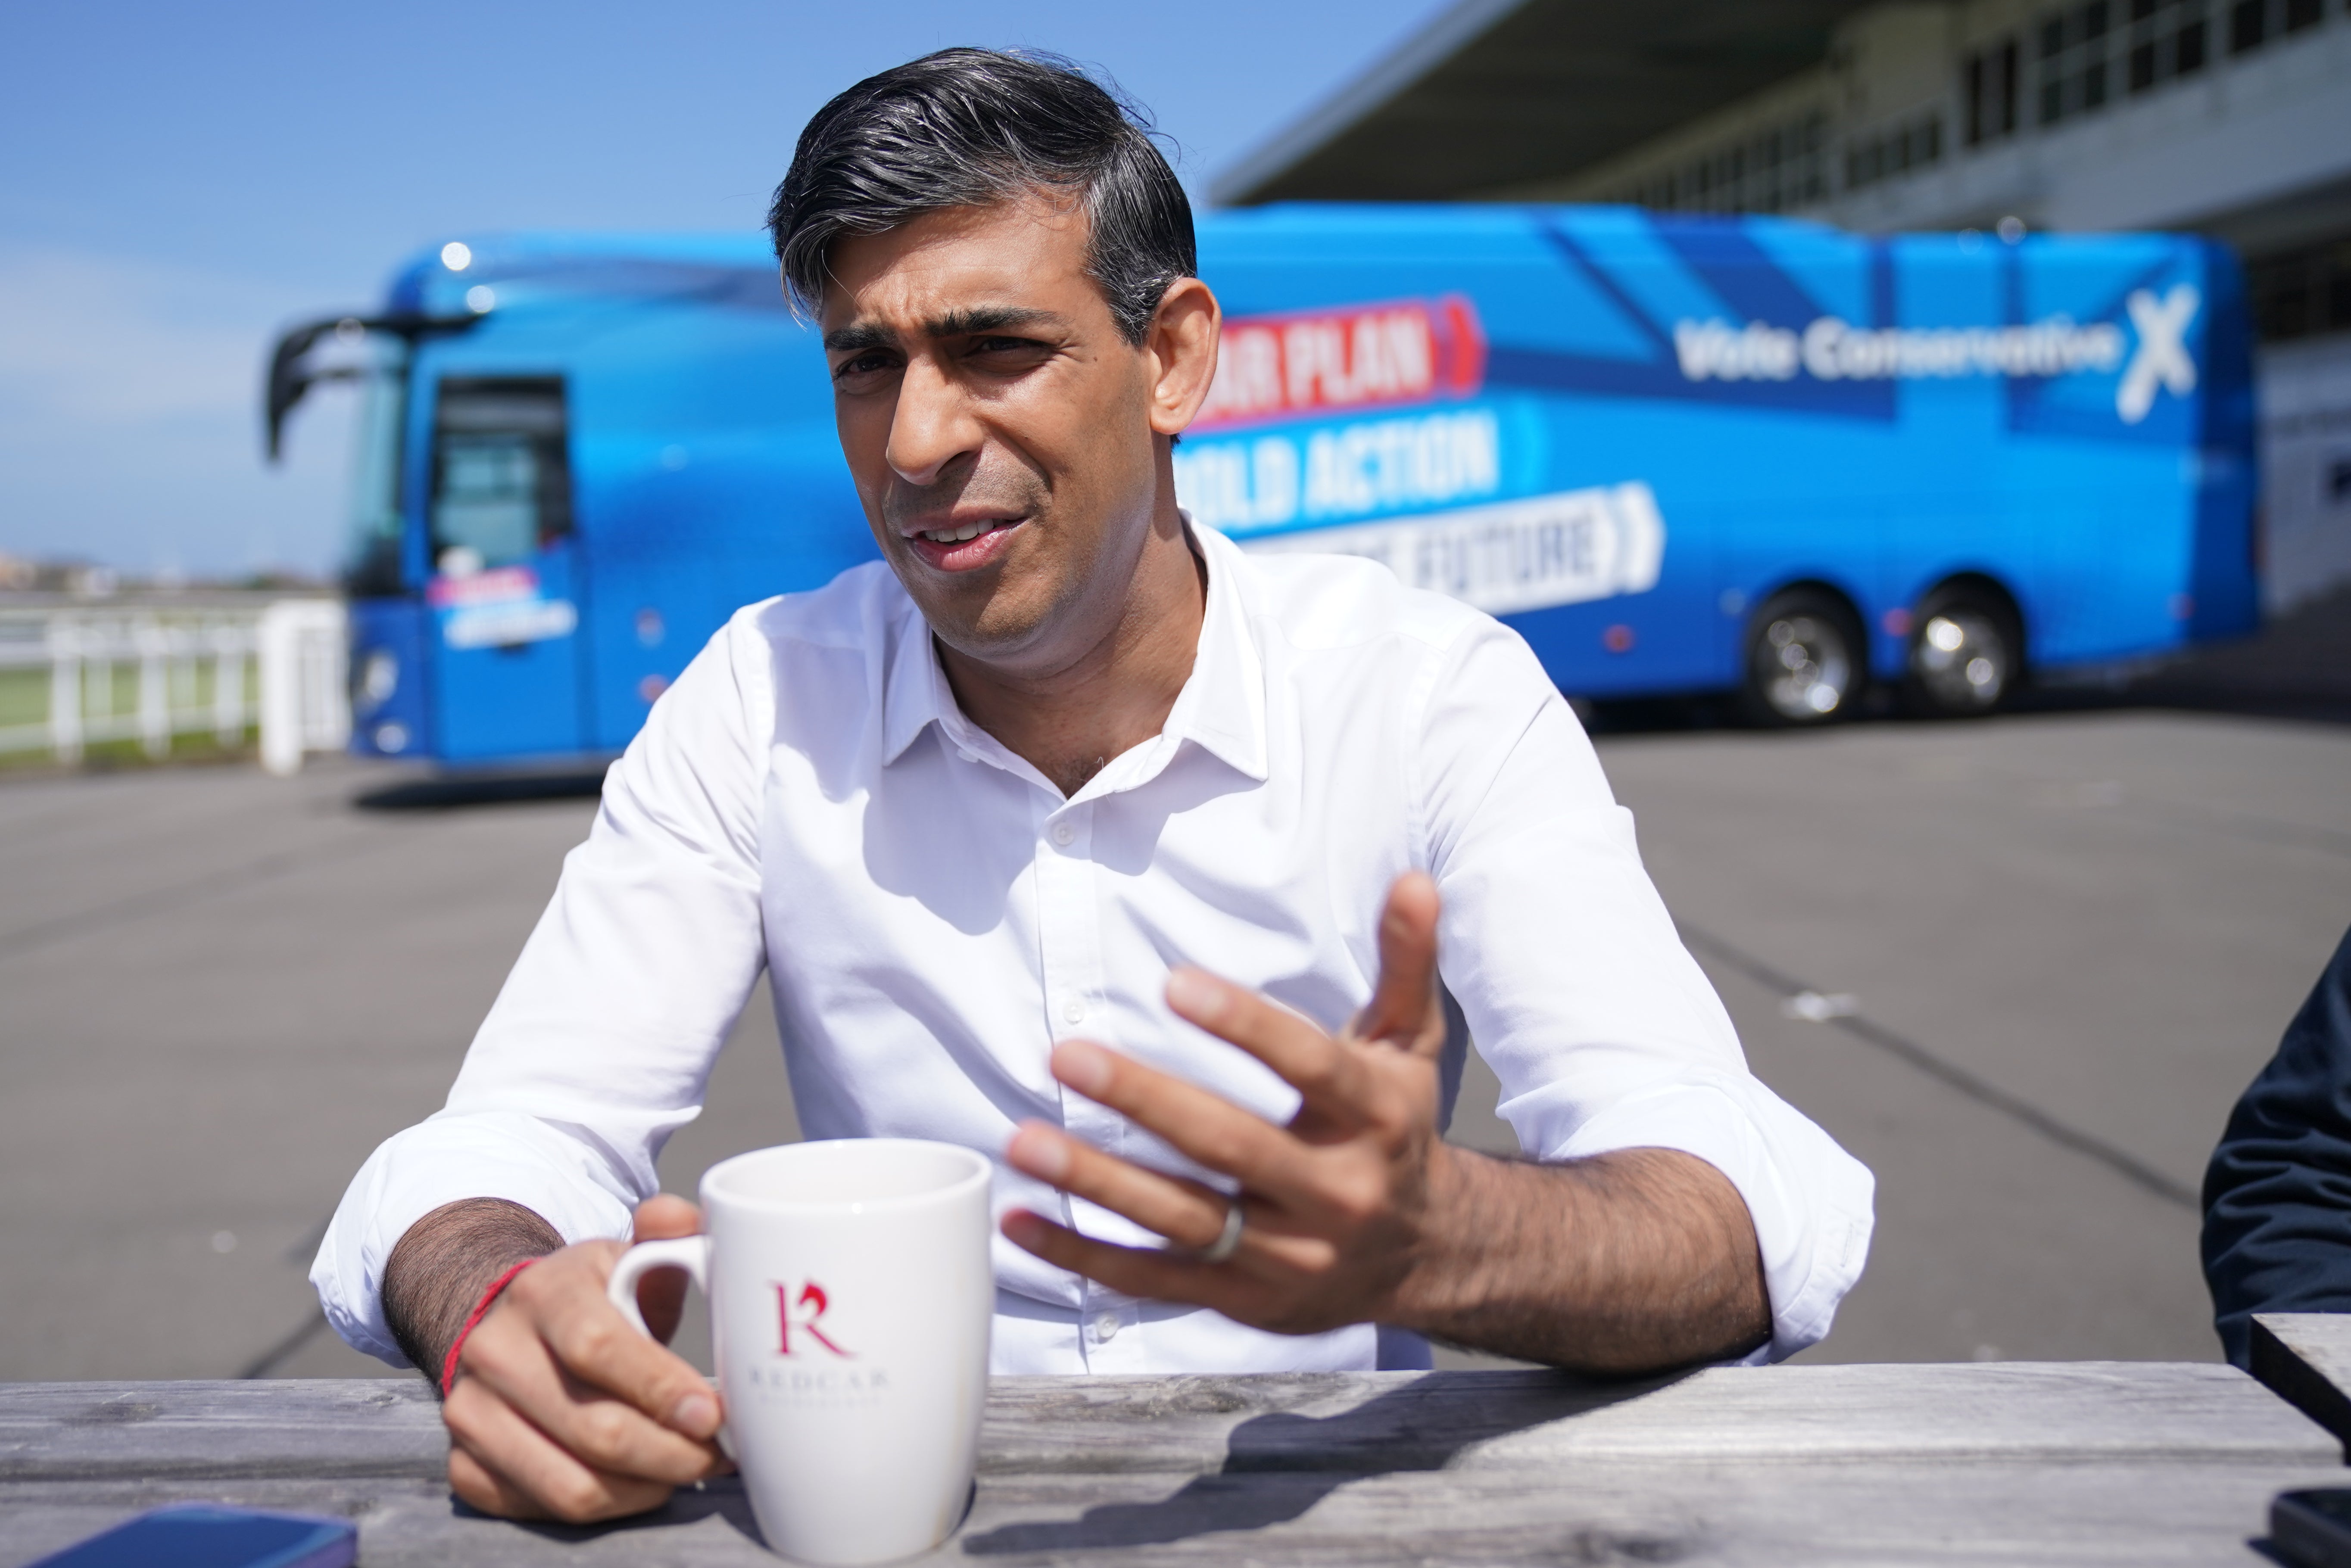 Rishi Sunak speaks to the media at the launch of the Conservative campaign bus at Redcar Racecourse